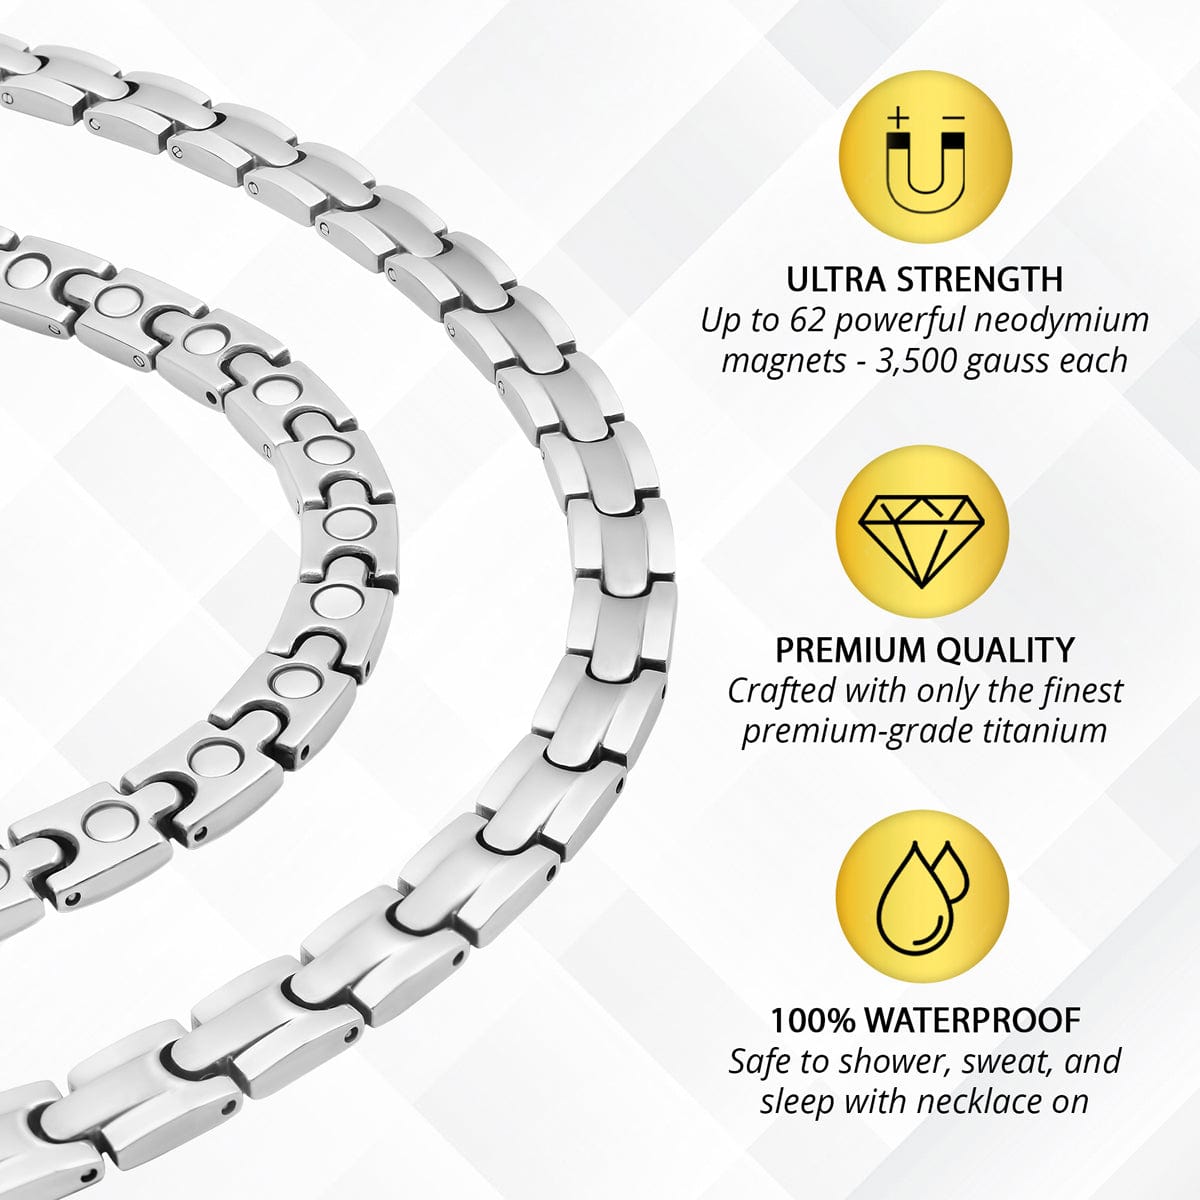 MagnetRX Magnetic Necklace for Men - Effective Mens Magnetic Necklaces - Stainless Steel Silver Curb Chain Necklace with Magnets